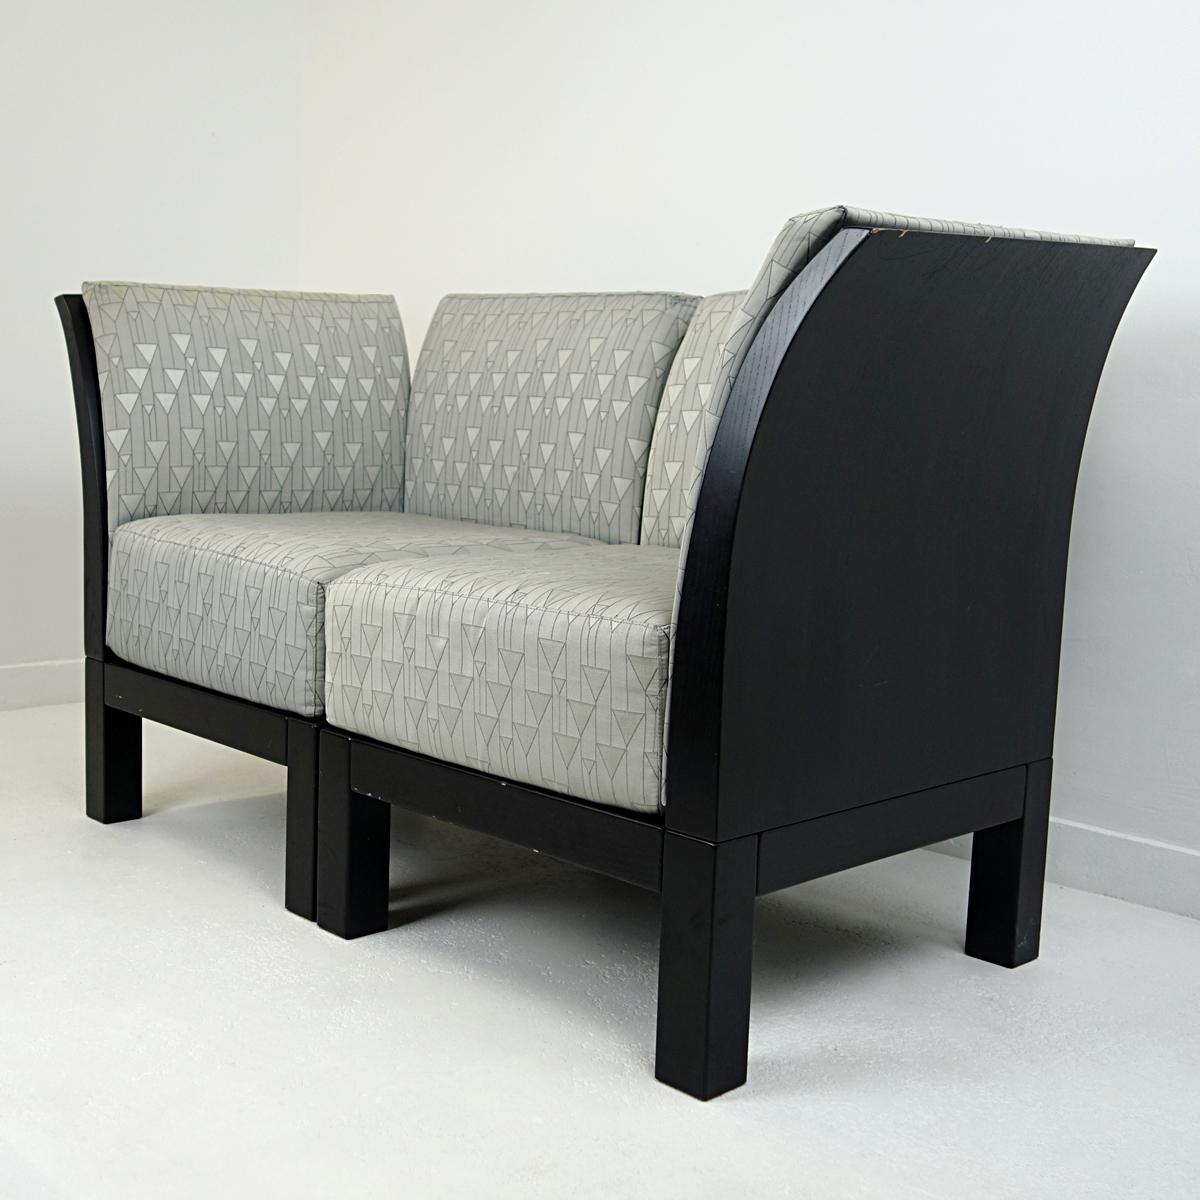 Post-Modern Pair of Postmodern Wooden Easy Chairs or Bench with Graphic Fabric by Thonet